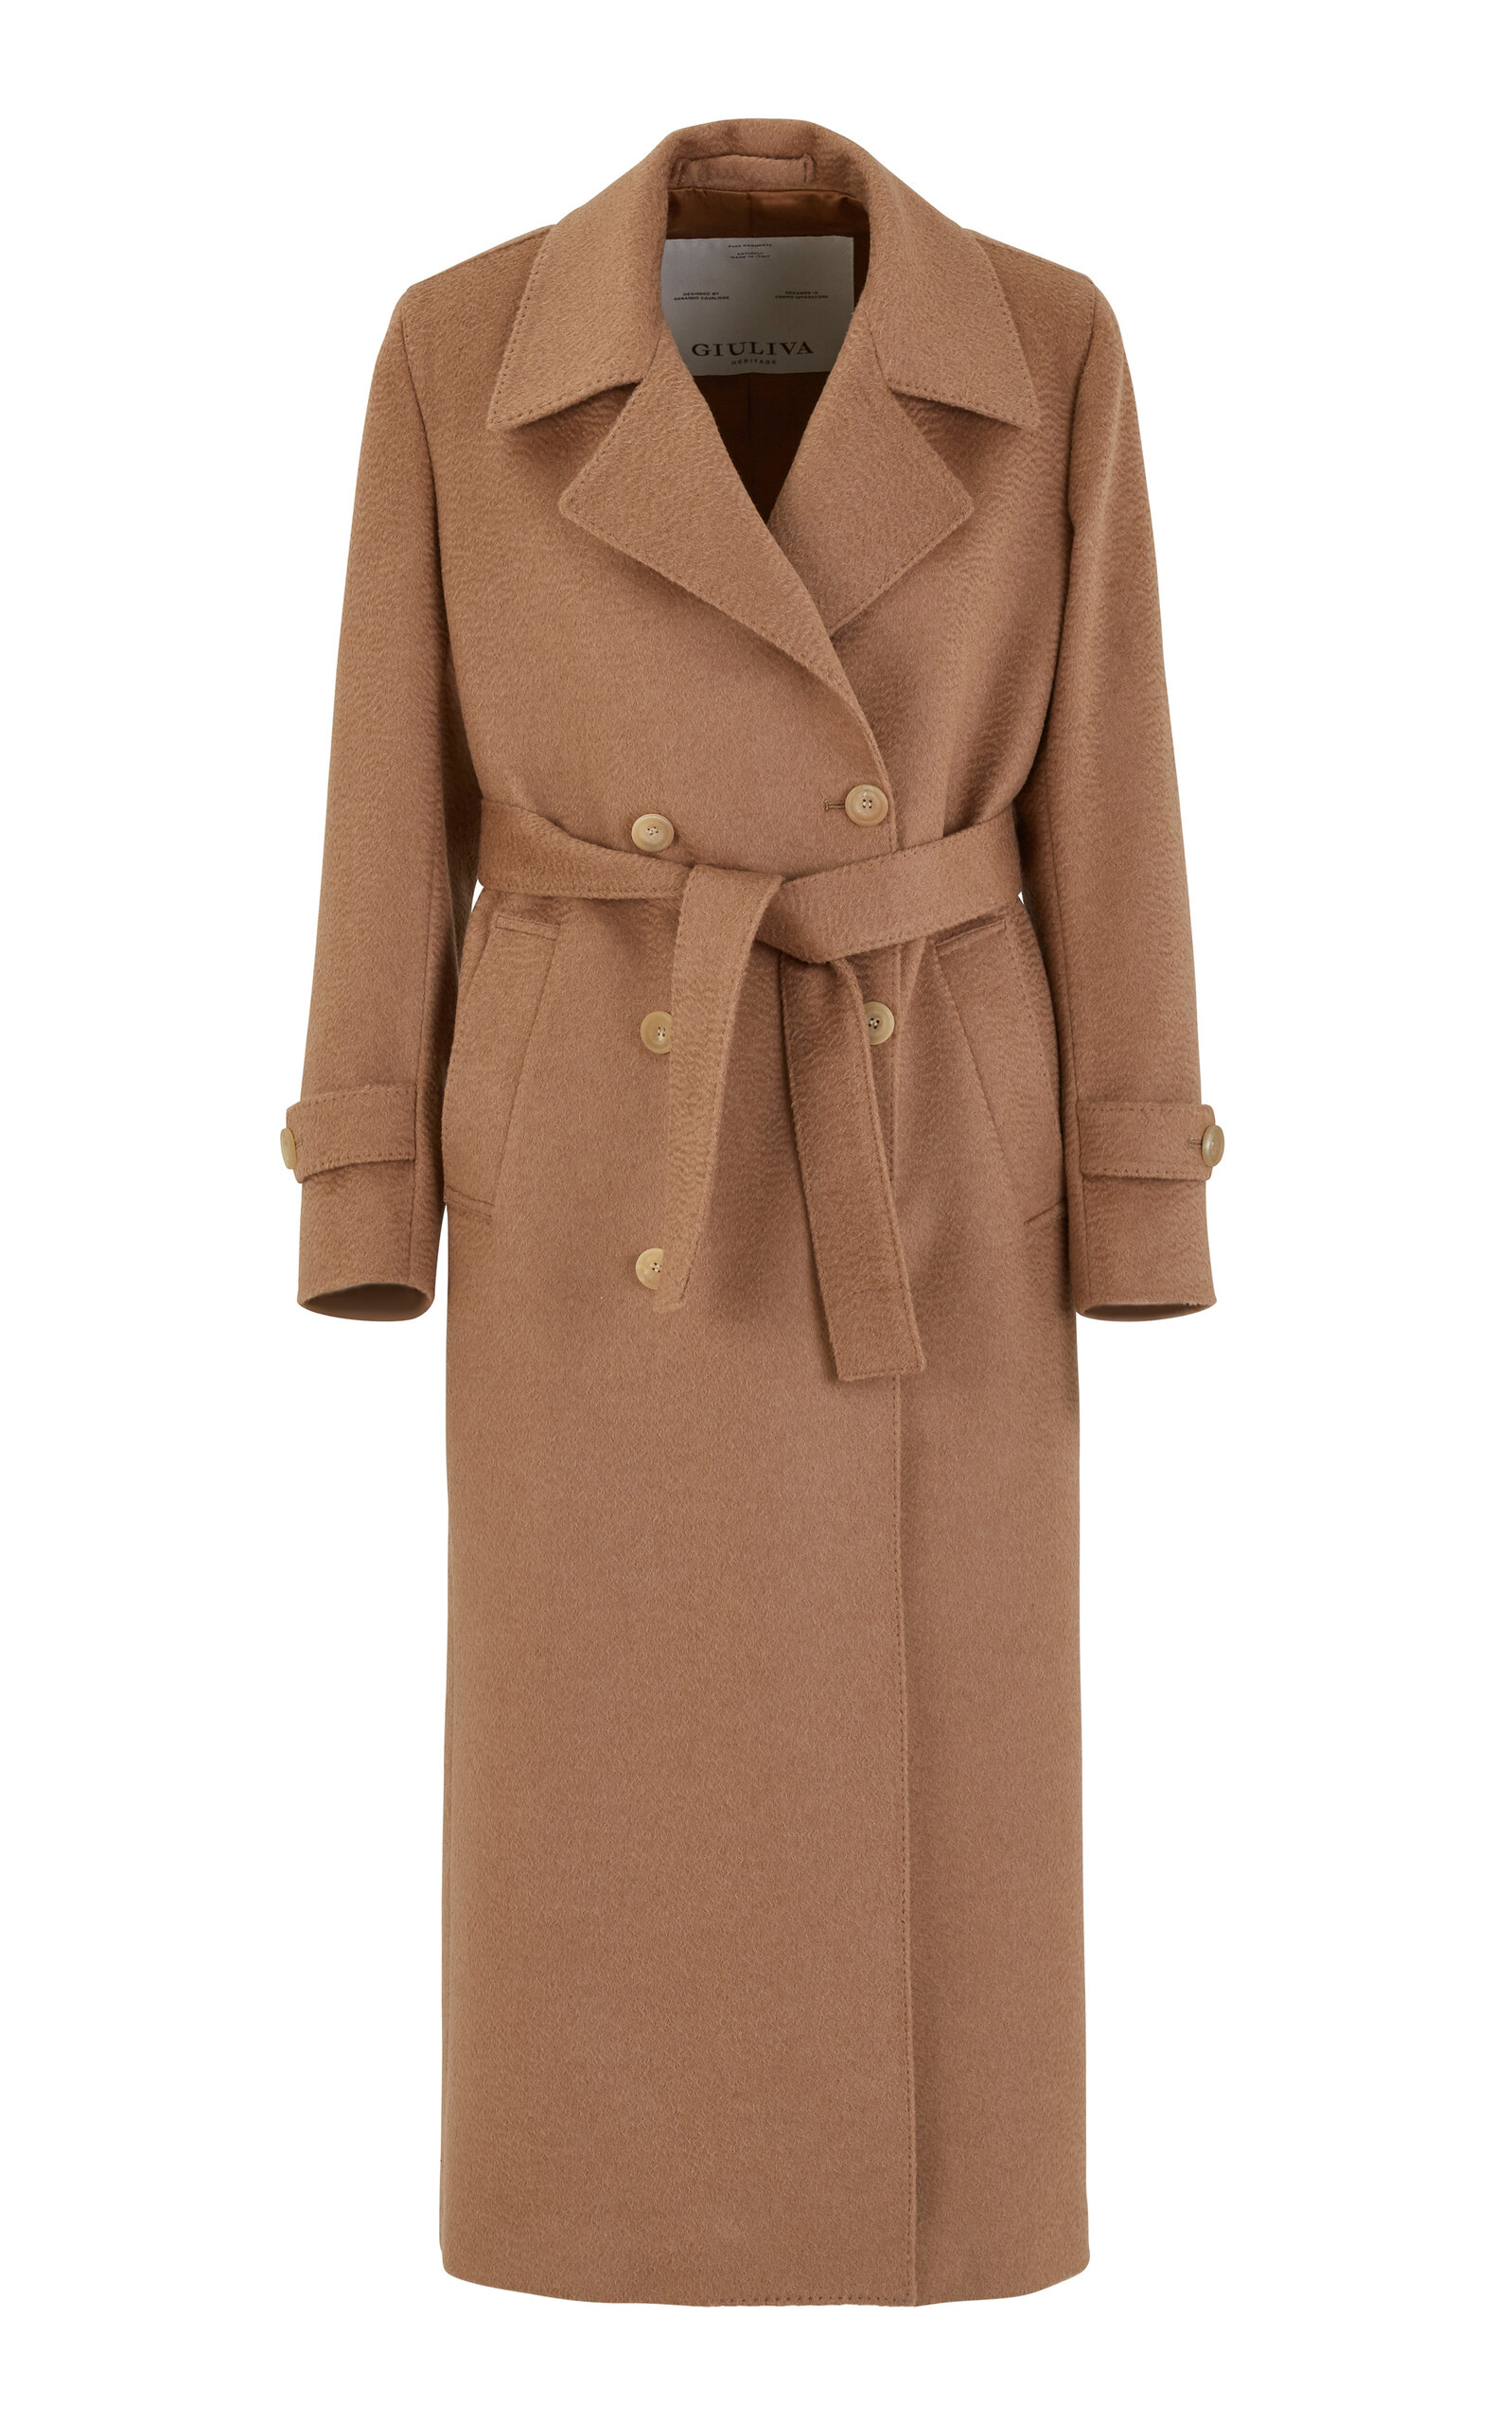 The Christie Camelhair Trench Coat